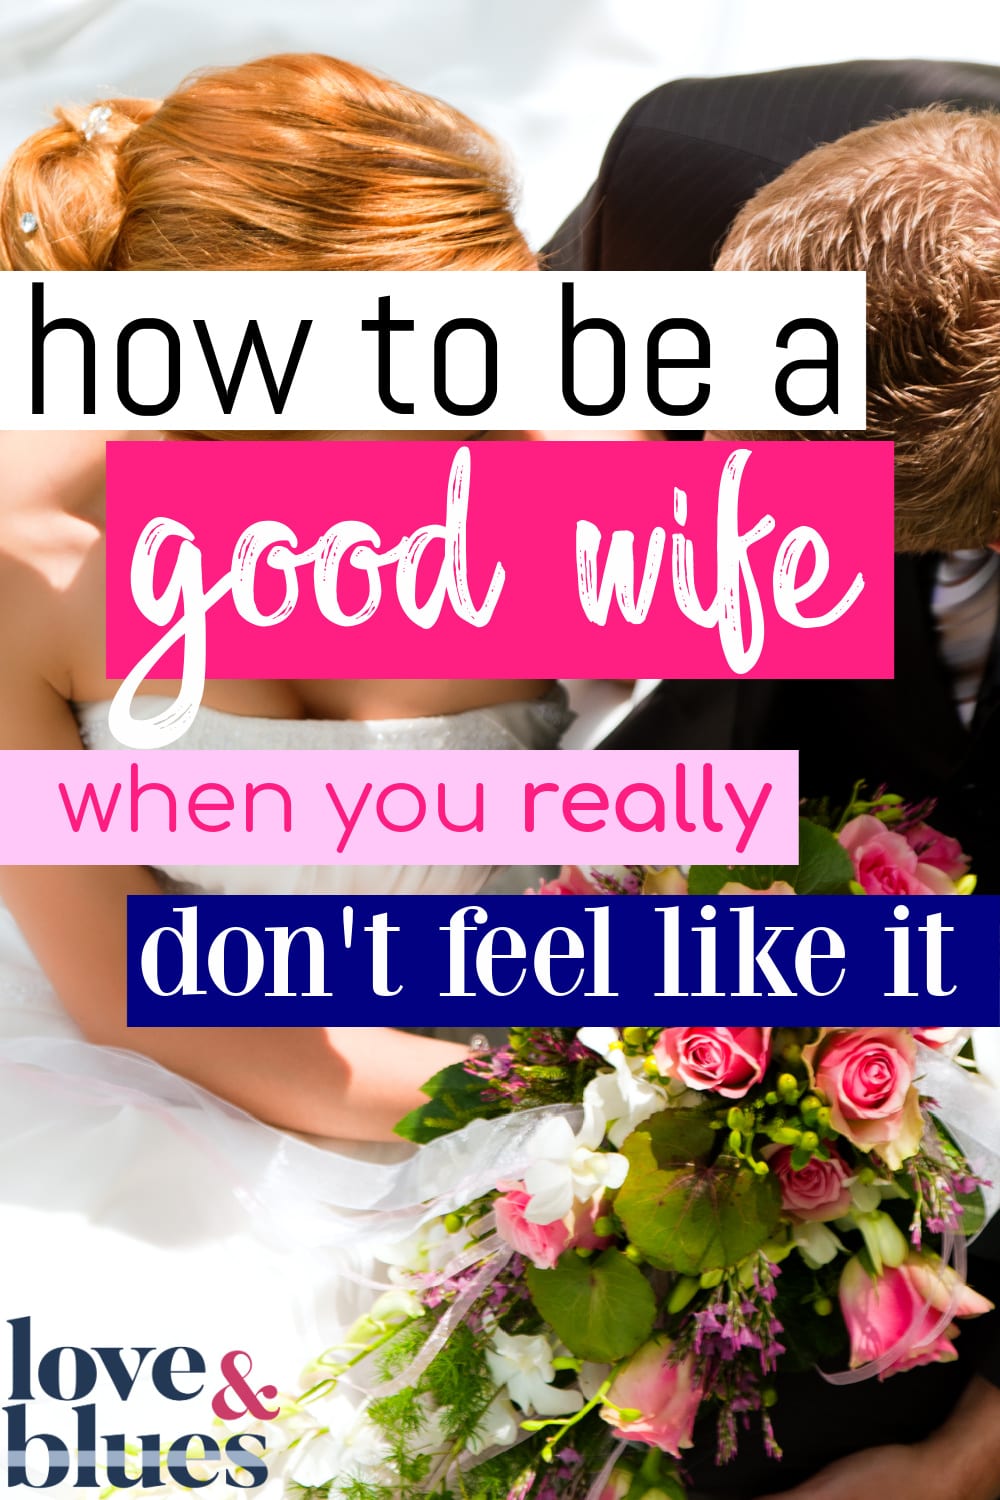 Great tips on how to be a good wife - with tons of encouragement we've come to expect from Leah Everly ;) Fantastic Christian marriage advice for the discouraged wife.